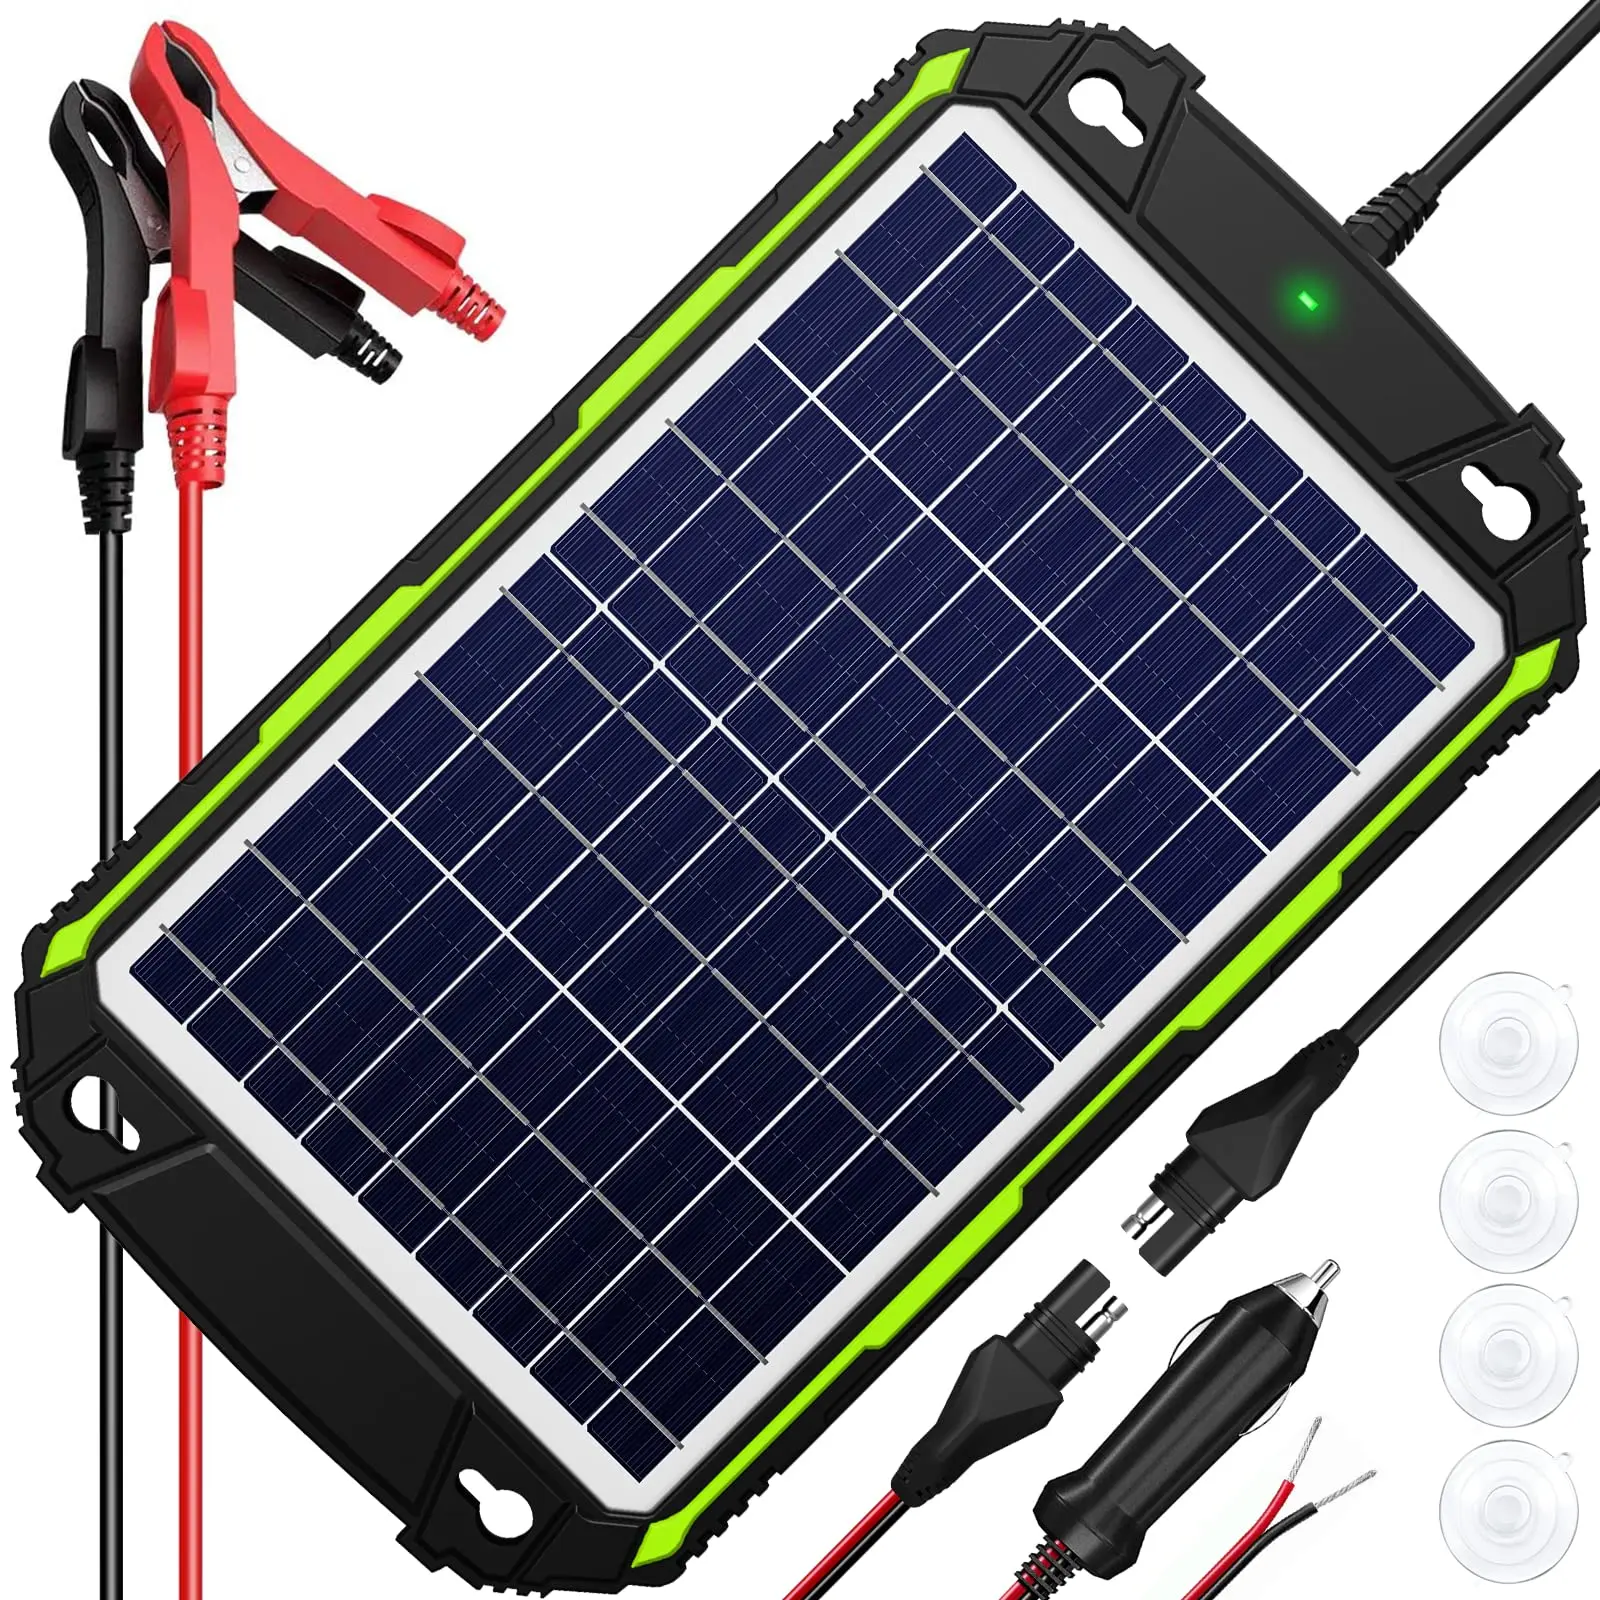 10w solar panel charge 12v battery - Can a 10v solar panel charge a 12V battery